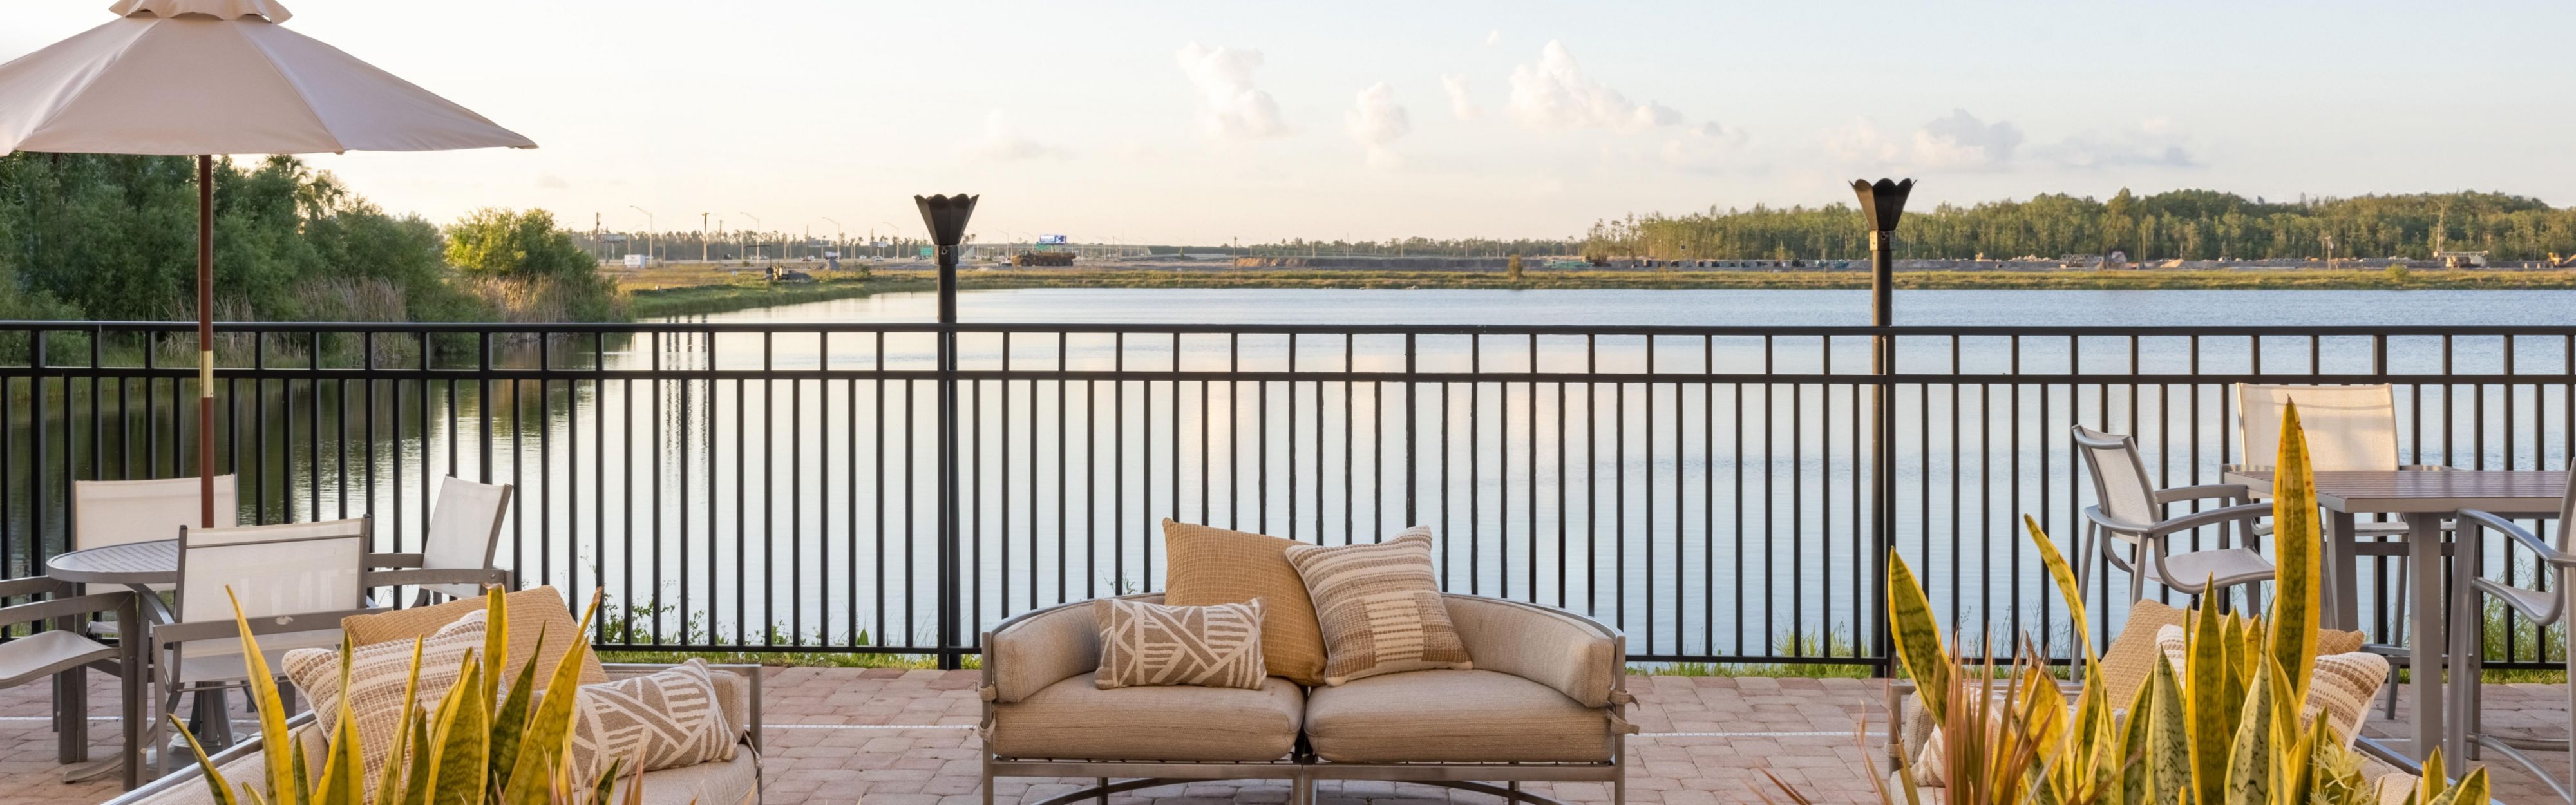 Relax near our courtyard firepit and take in the view of the lake.